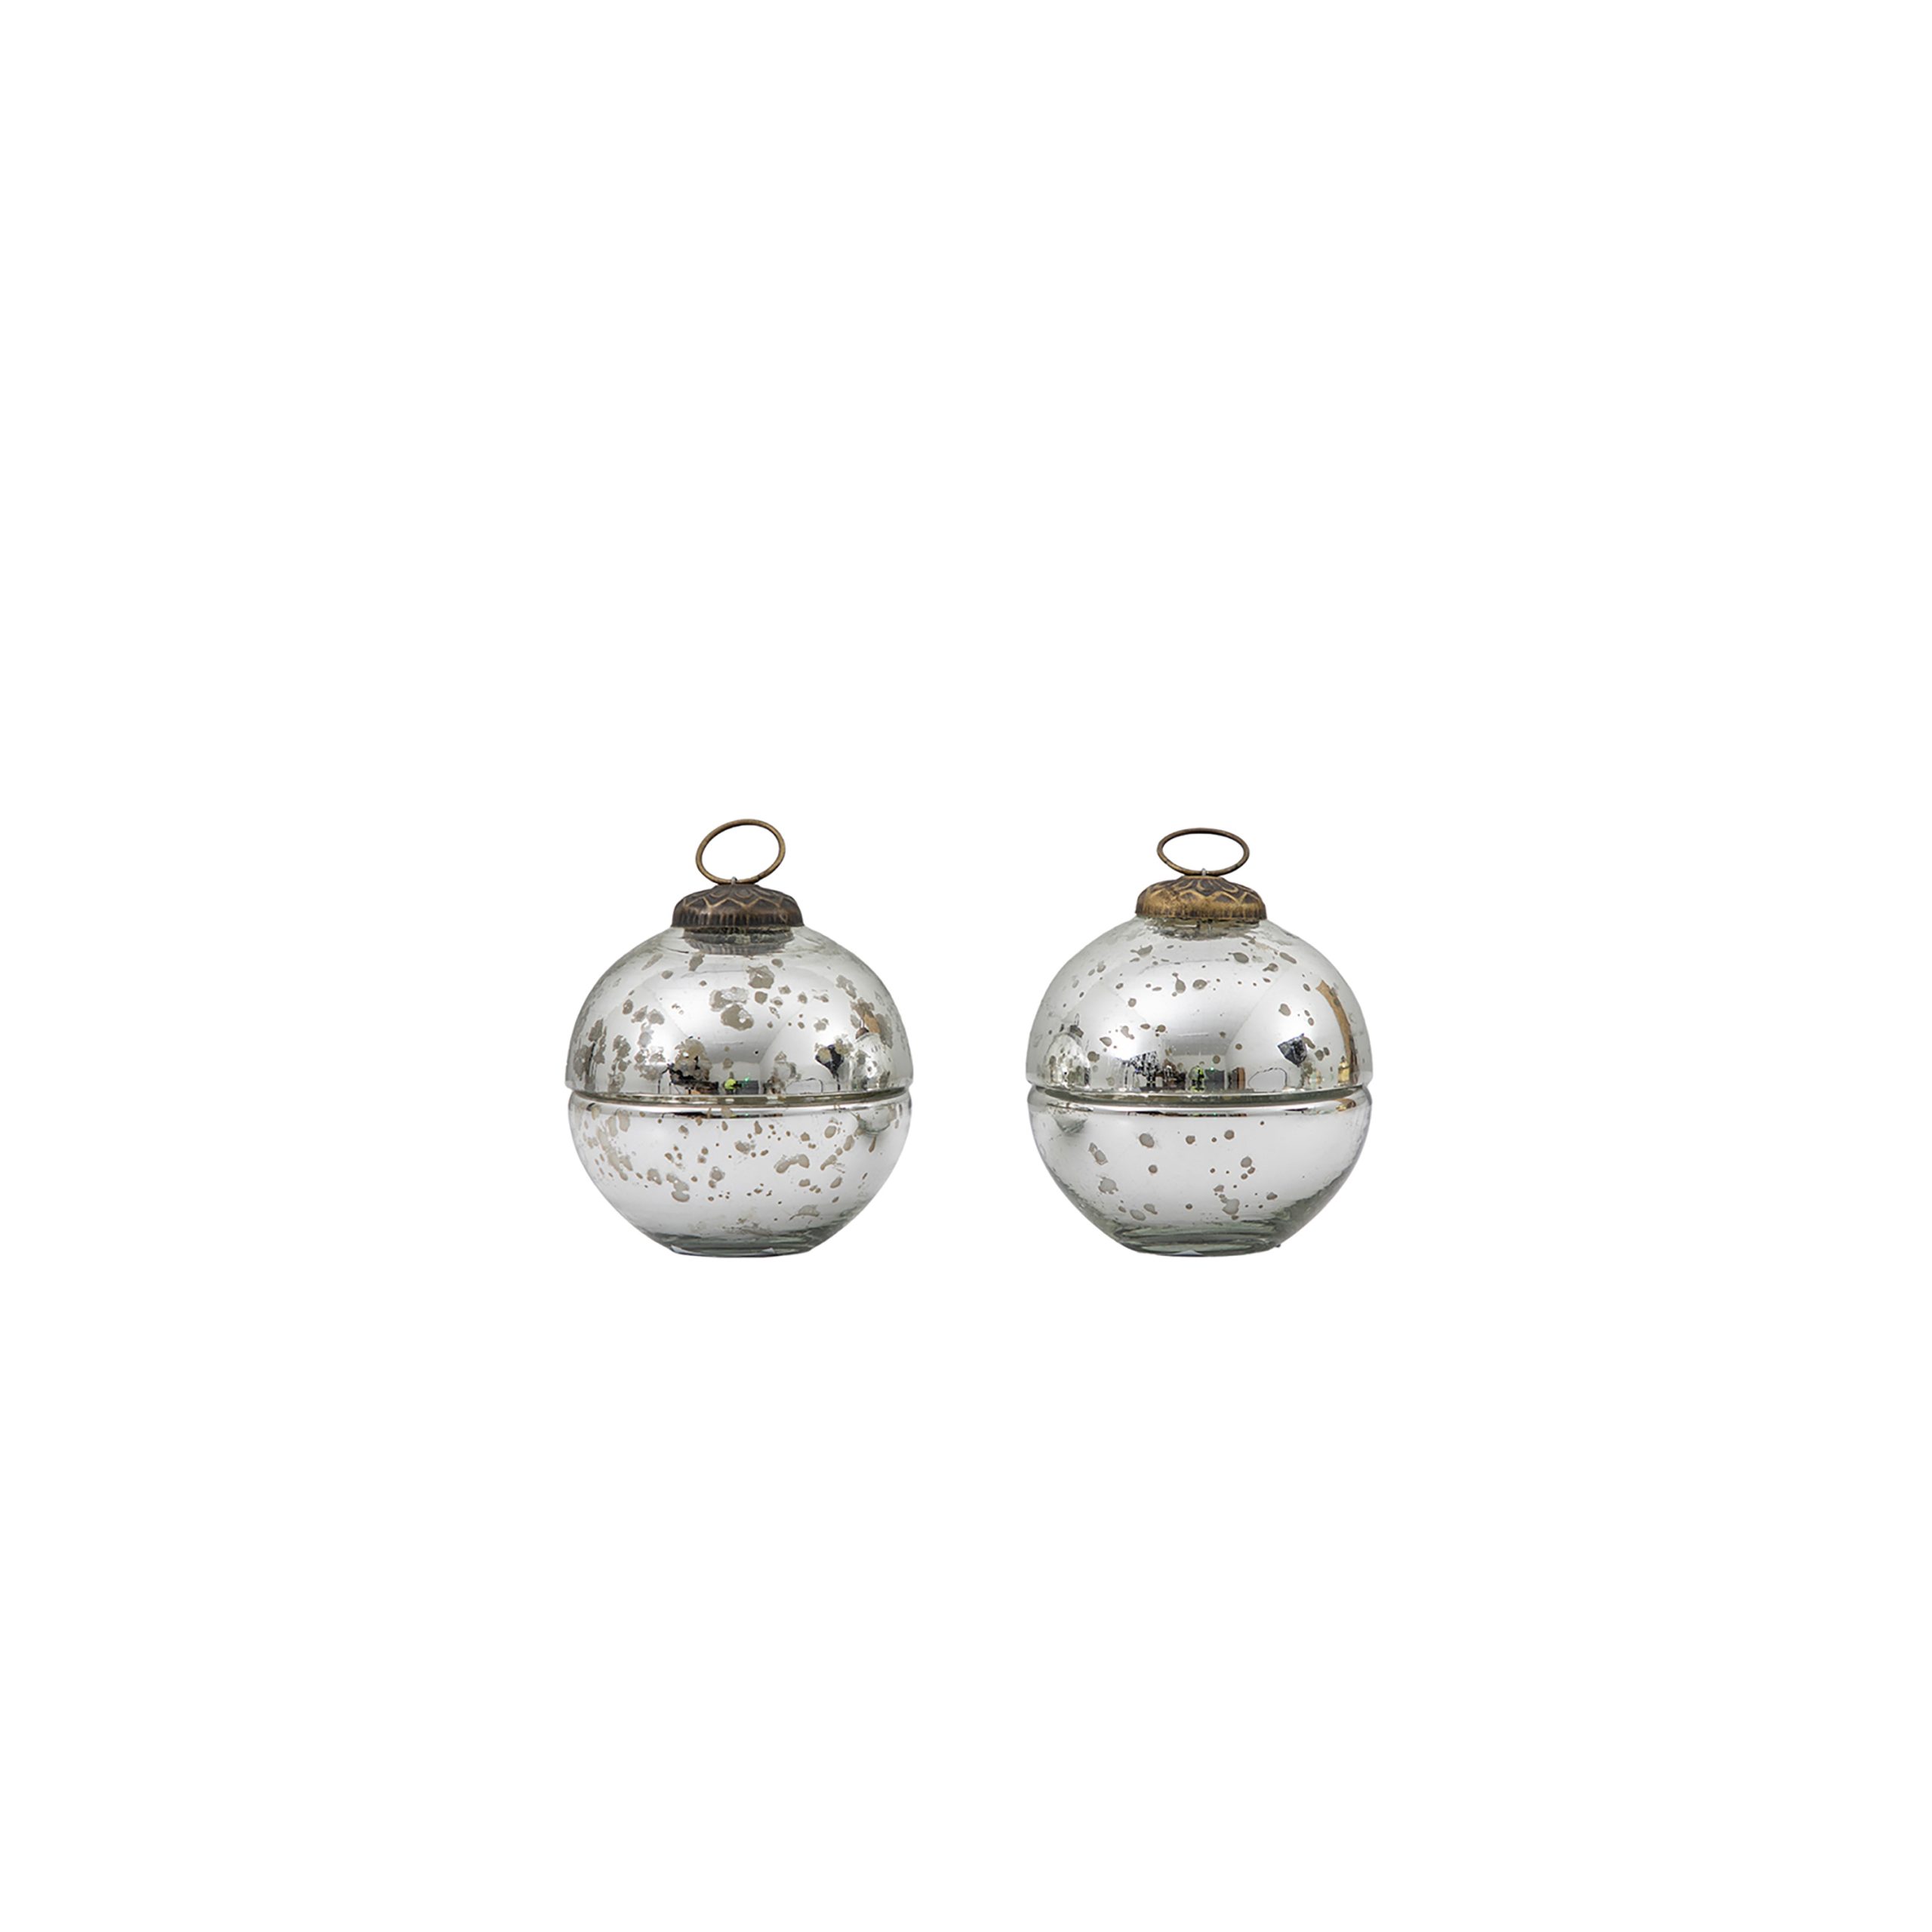 Gallery Direct Bauble Votive Small Silver (Pack of 2)